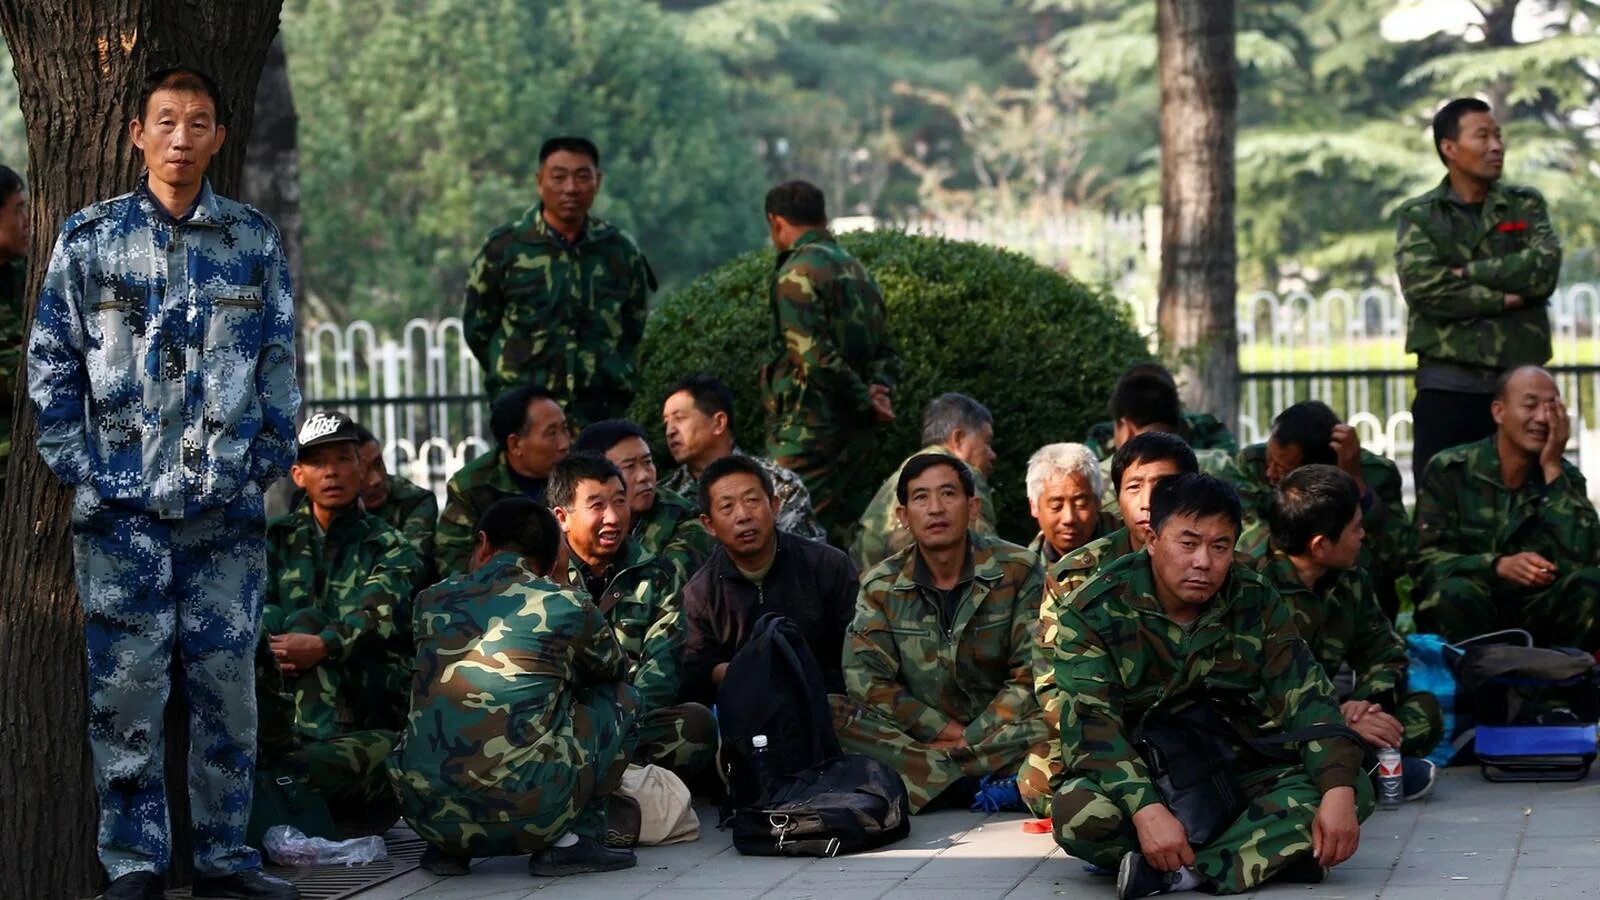 Asia force. PLA China. 中国军人 Chinese Military Soldiers. Military and Economics.